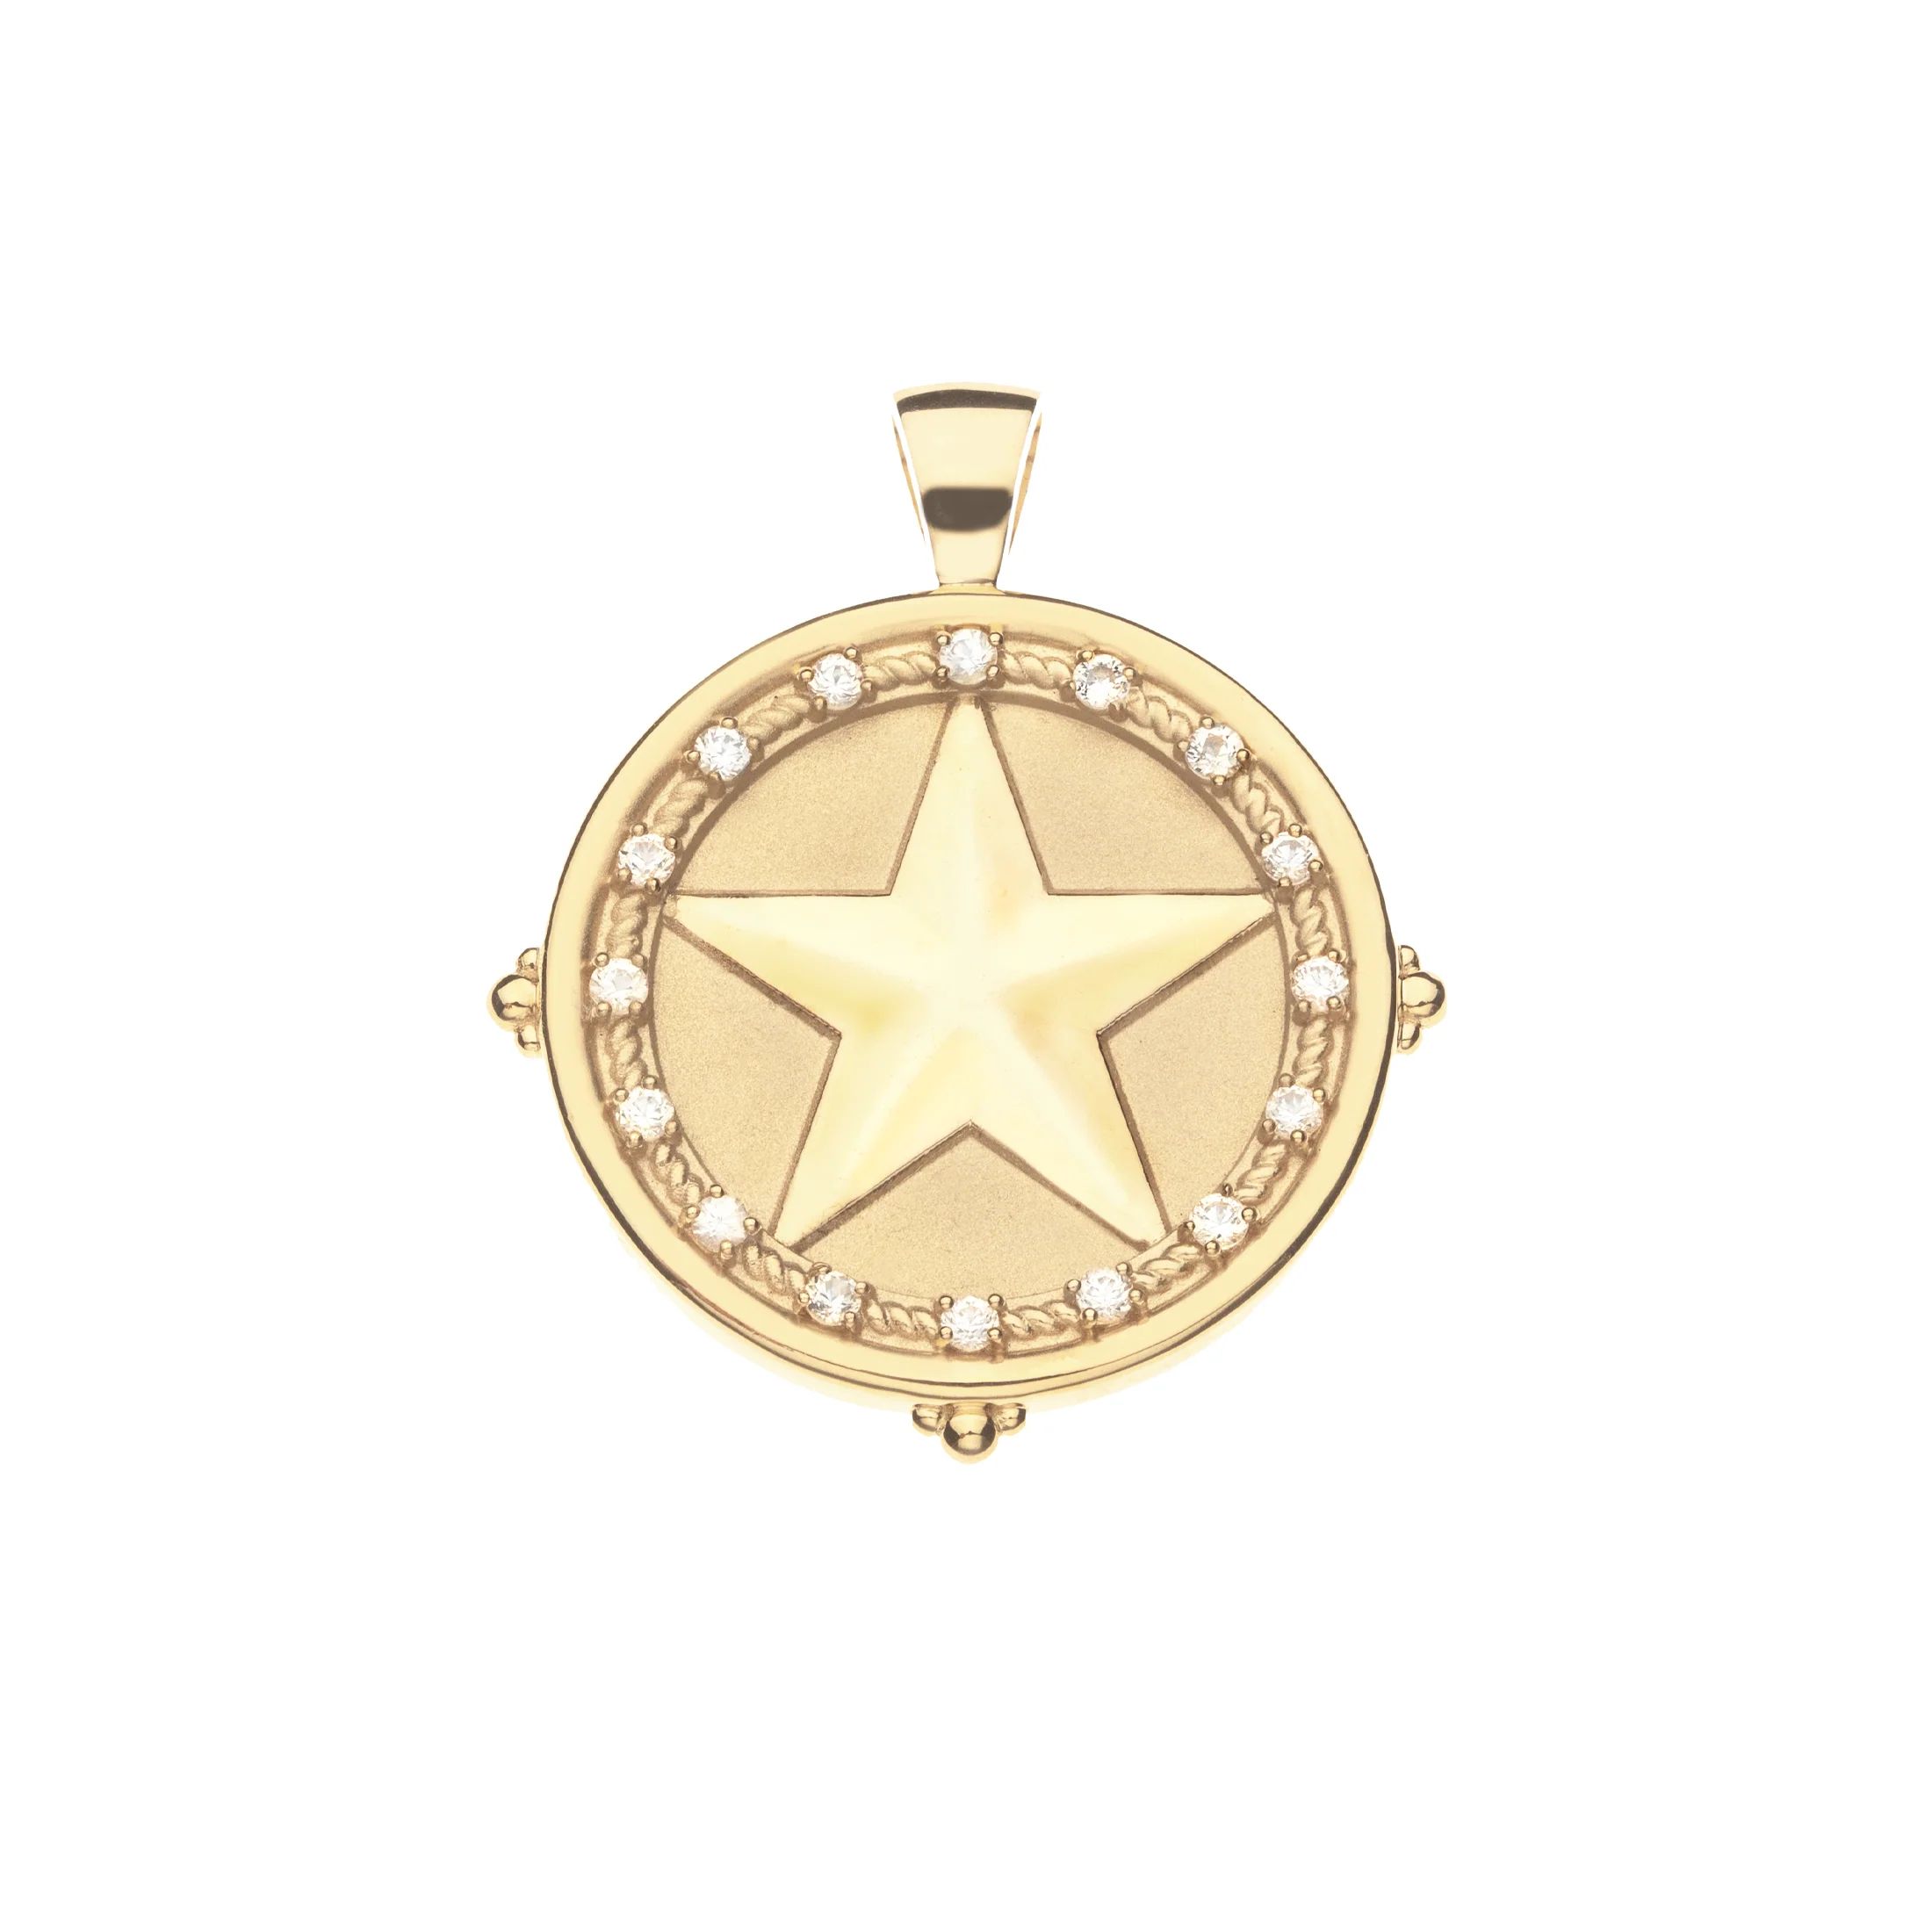 TEXAS JW Original Pendant Coin in 14k Solid Gold with Stones | Jane Win